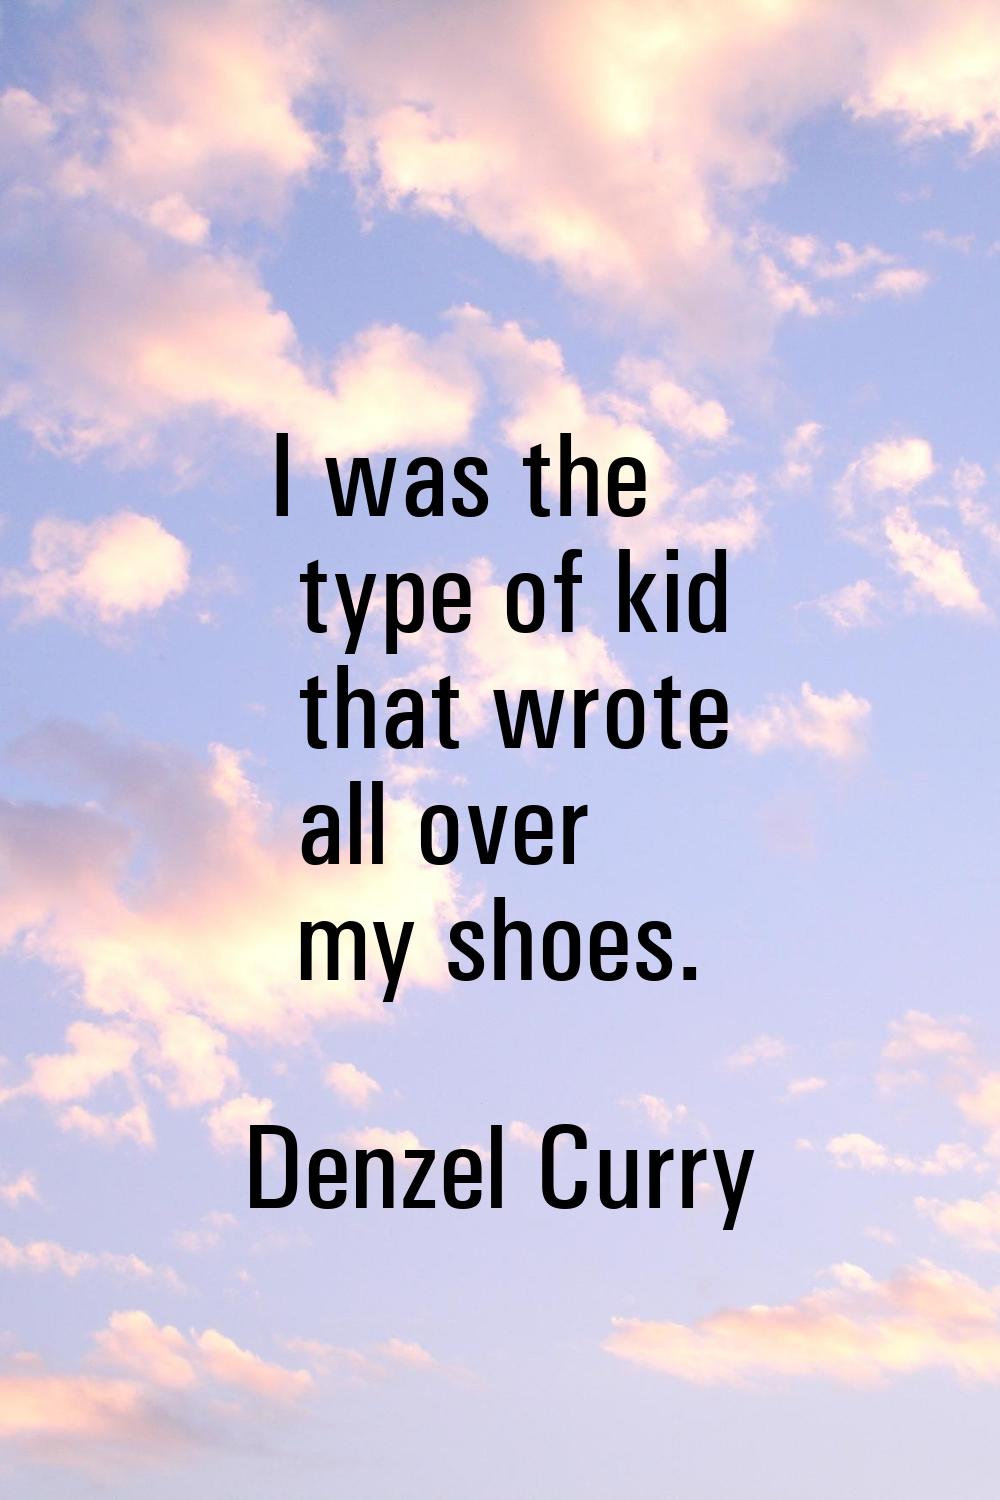 I was the type of kid that wrote all over my shoes.